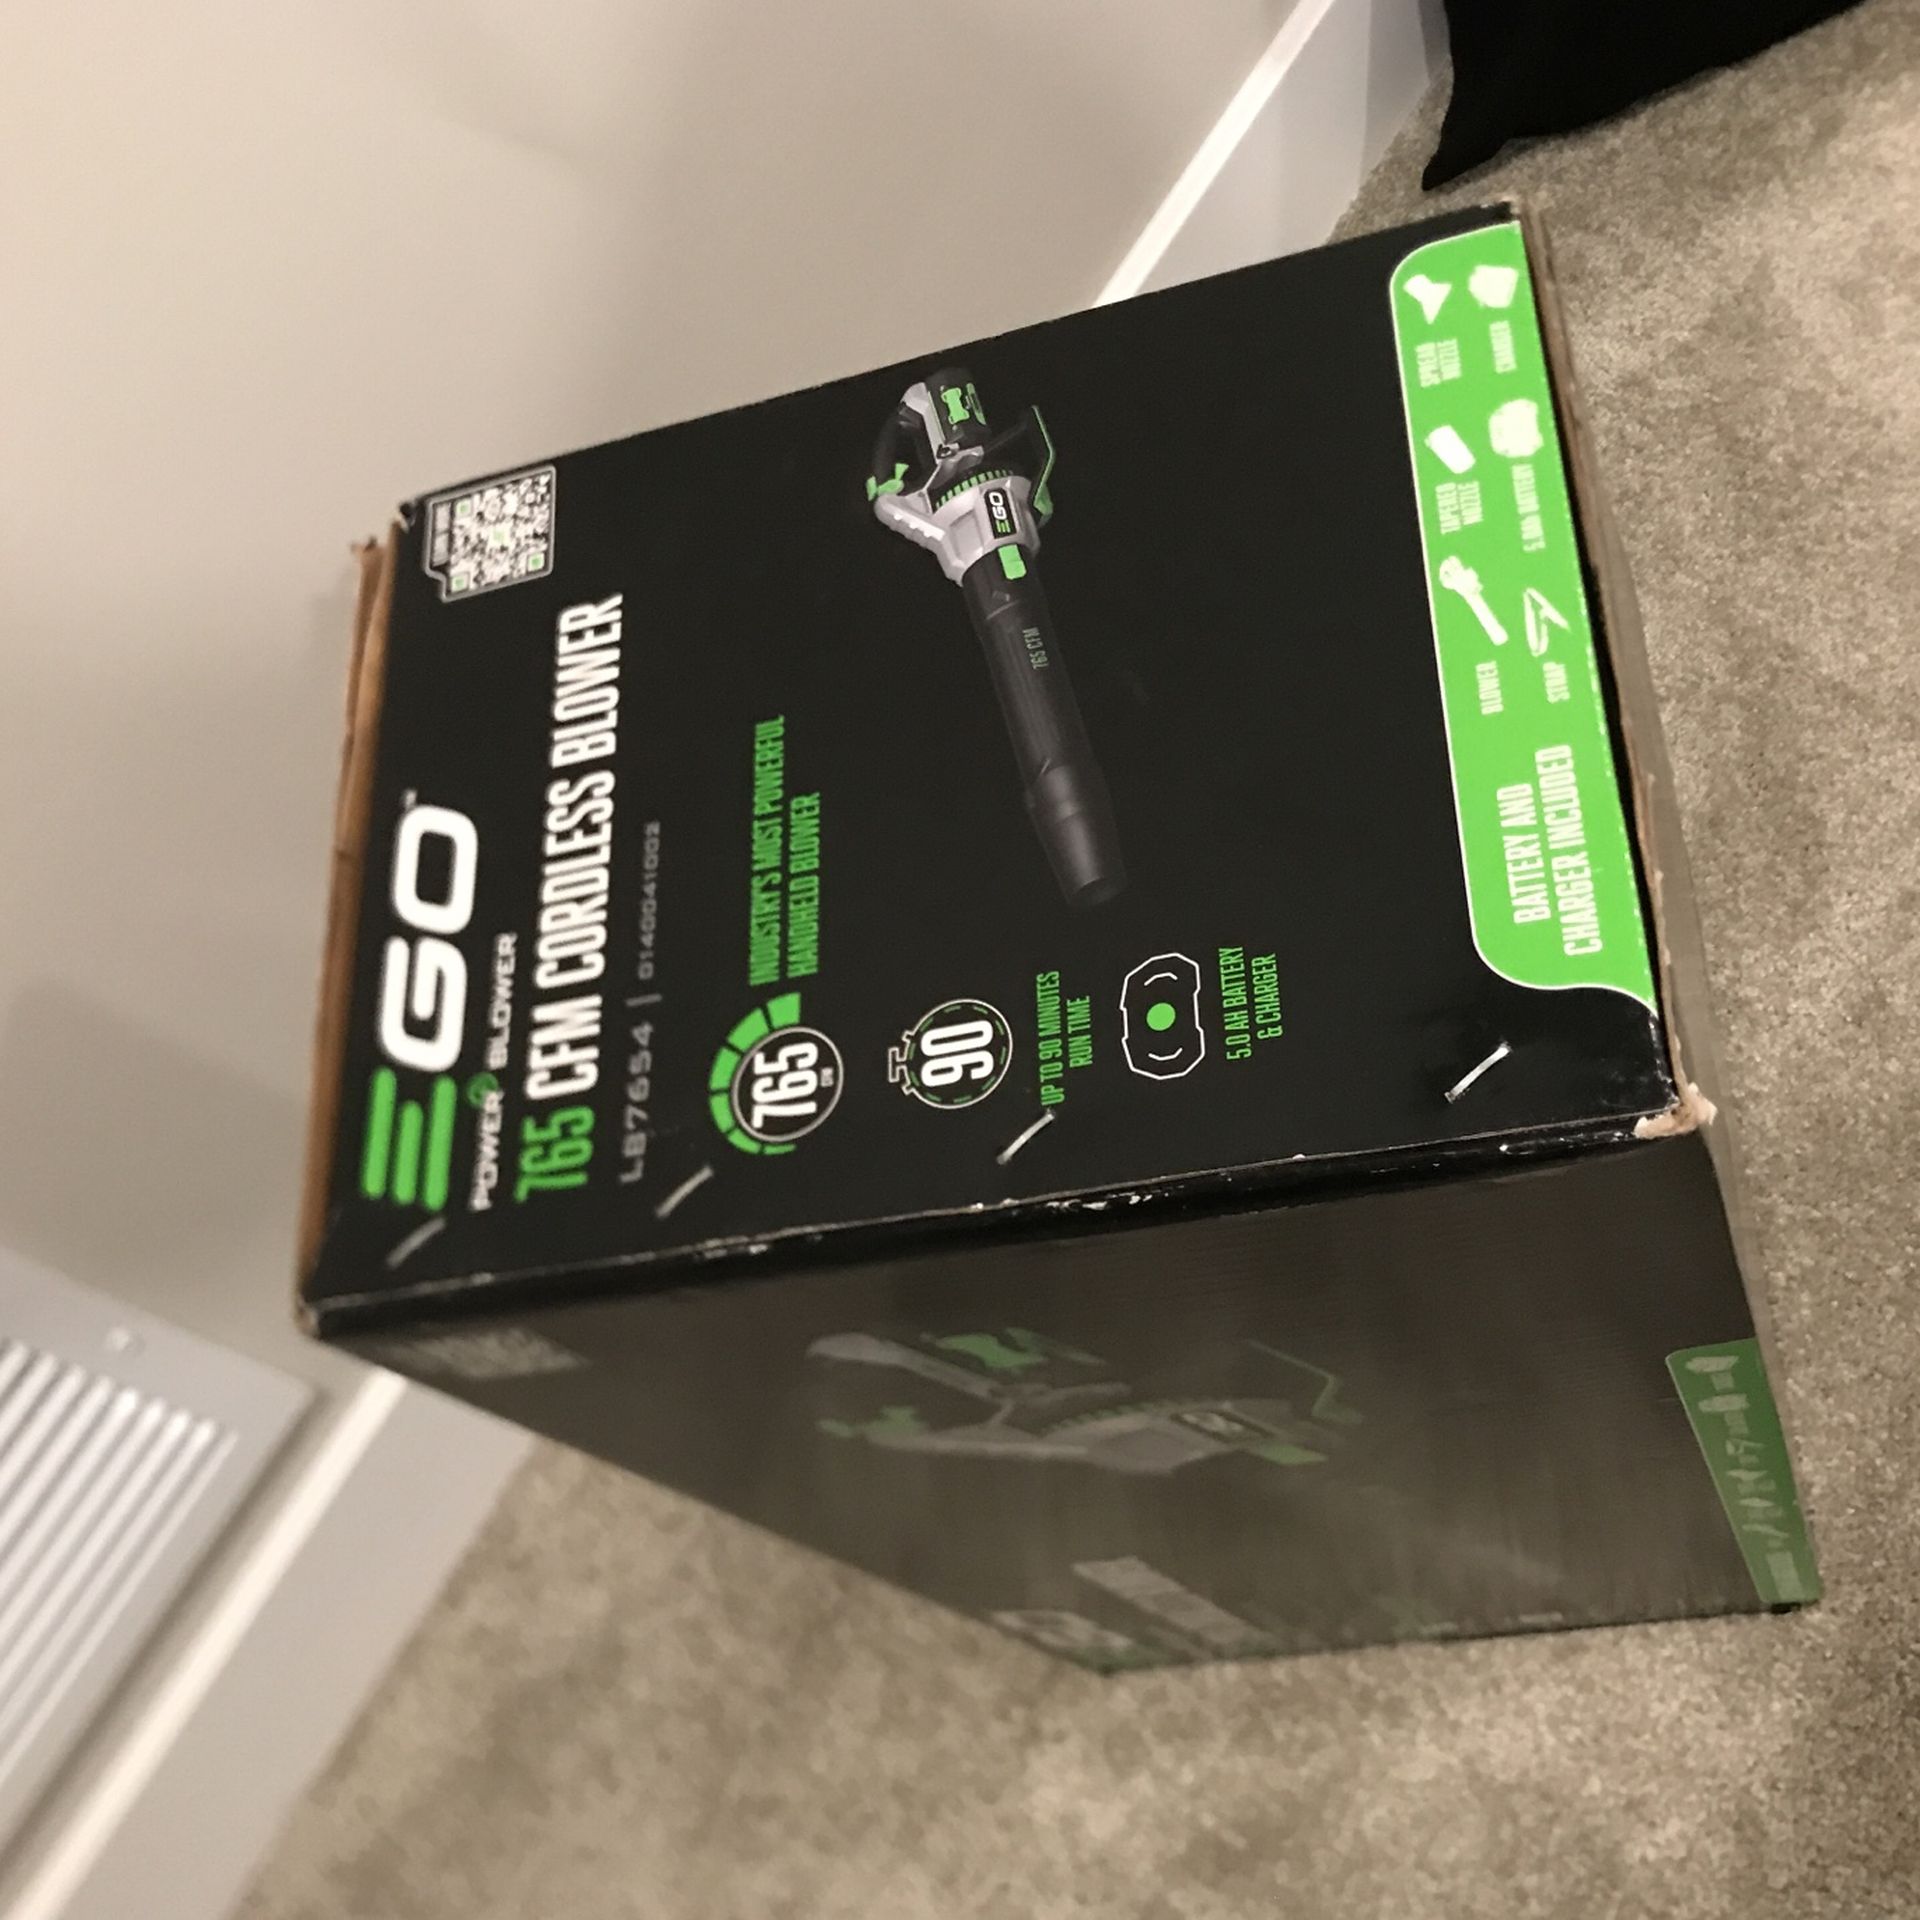 EGO 765 CFM Cordless Blower for Sale in District Heights, MD - OfferUp